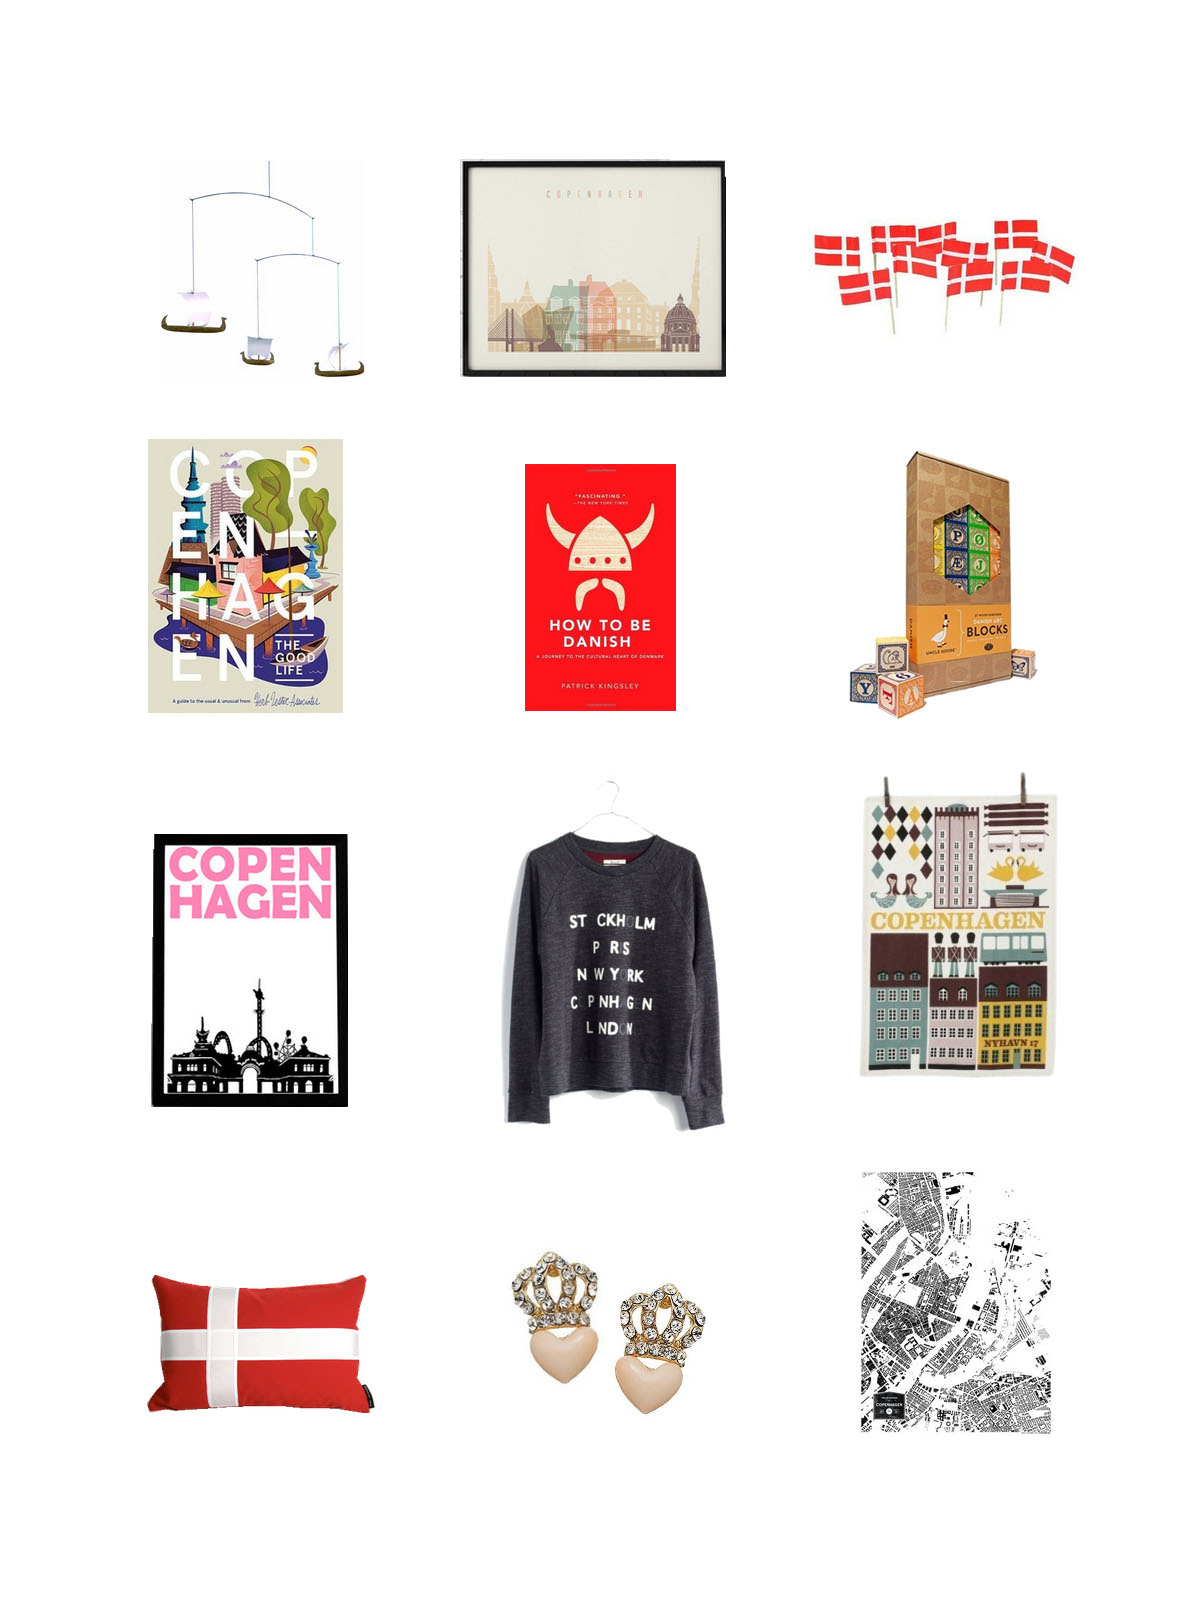 Goods inspired by Copenhagen. Try these long lasting useful items instead of traditional souvenirs!